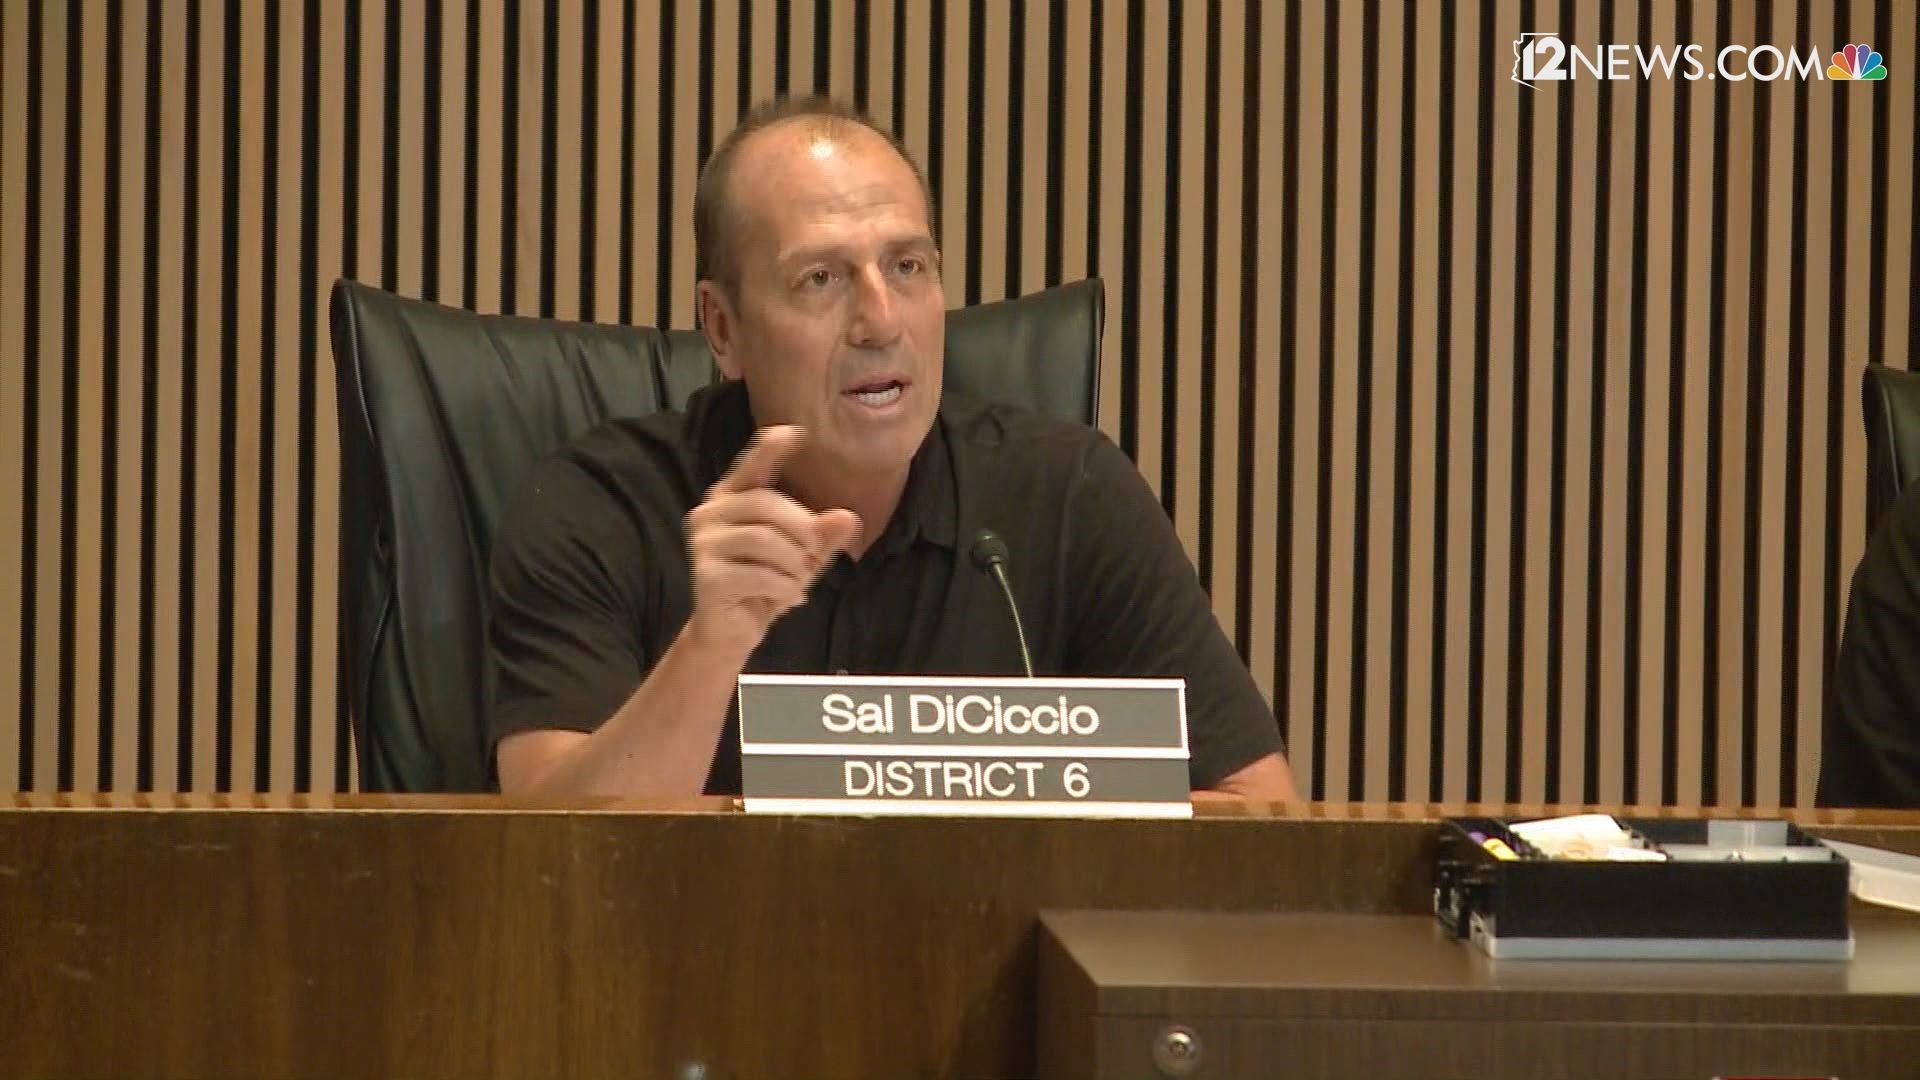 At a Phoenix city council meeting Wednesday, members of the public had the opportunity to address the city council about the now-viral shoplifting incident involving a Phoenix couple and Phoenix PD. In the middle of public comments, Phoenix City Councilman Sal DiCiccio addressed the public, shouting that they were anarchists and he did not appreciate them calling the police names. Members of the public began shouting back in an exchange that lasted about two minutes.